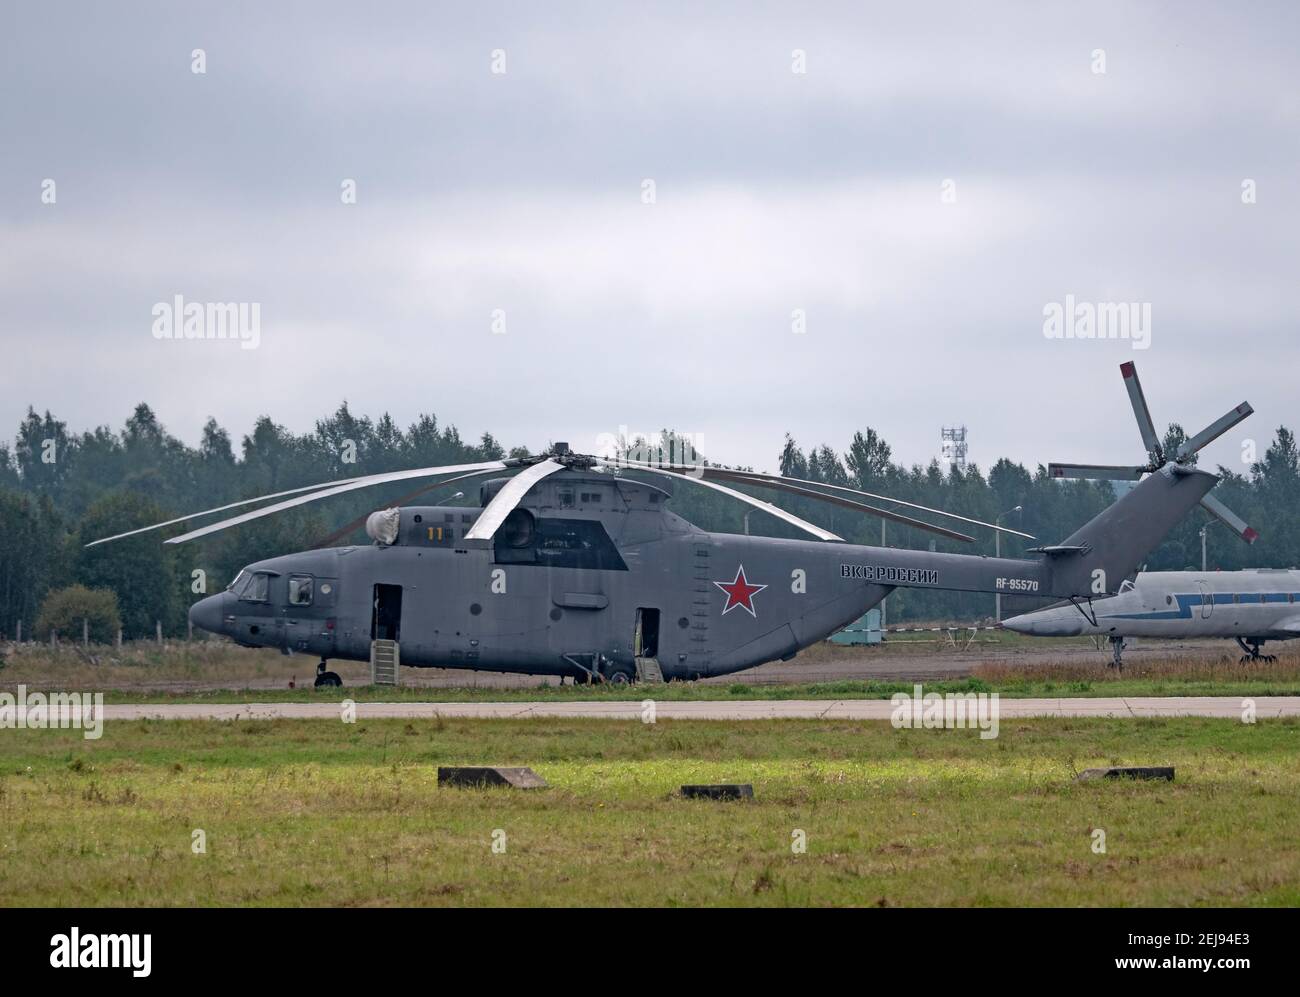 August 29, 2020. Kubinka, Moscow region. Russian Air Force helicopter Mil Mi-26 during demonstration flights at the Kubinka airbase. Stock Photo